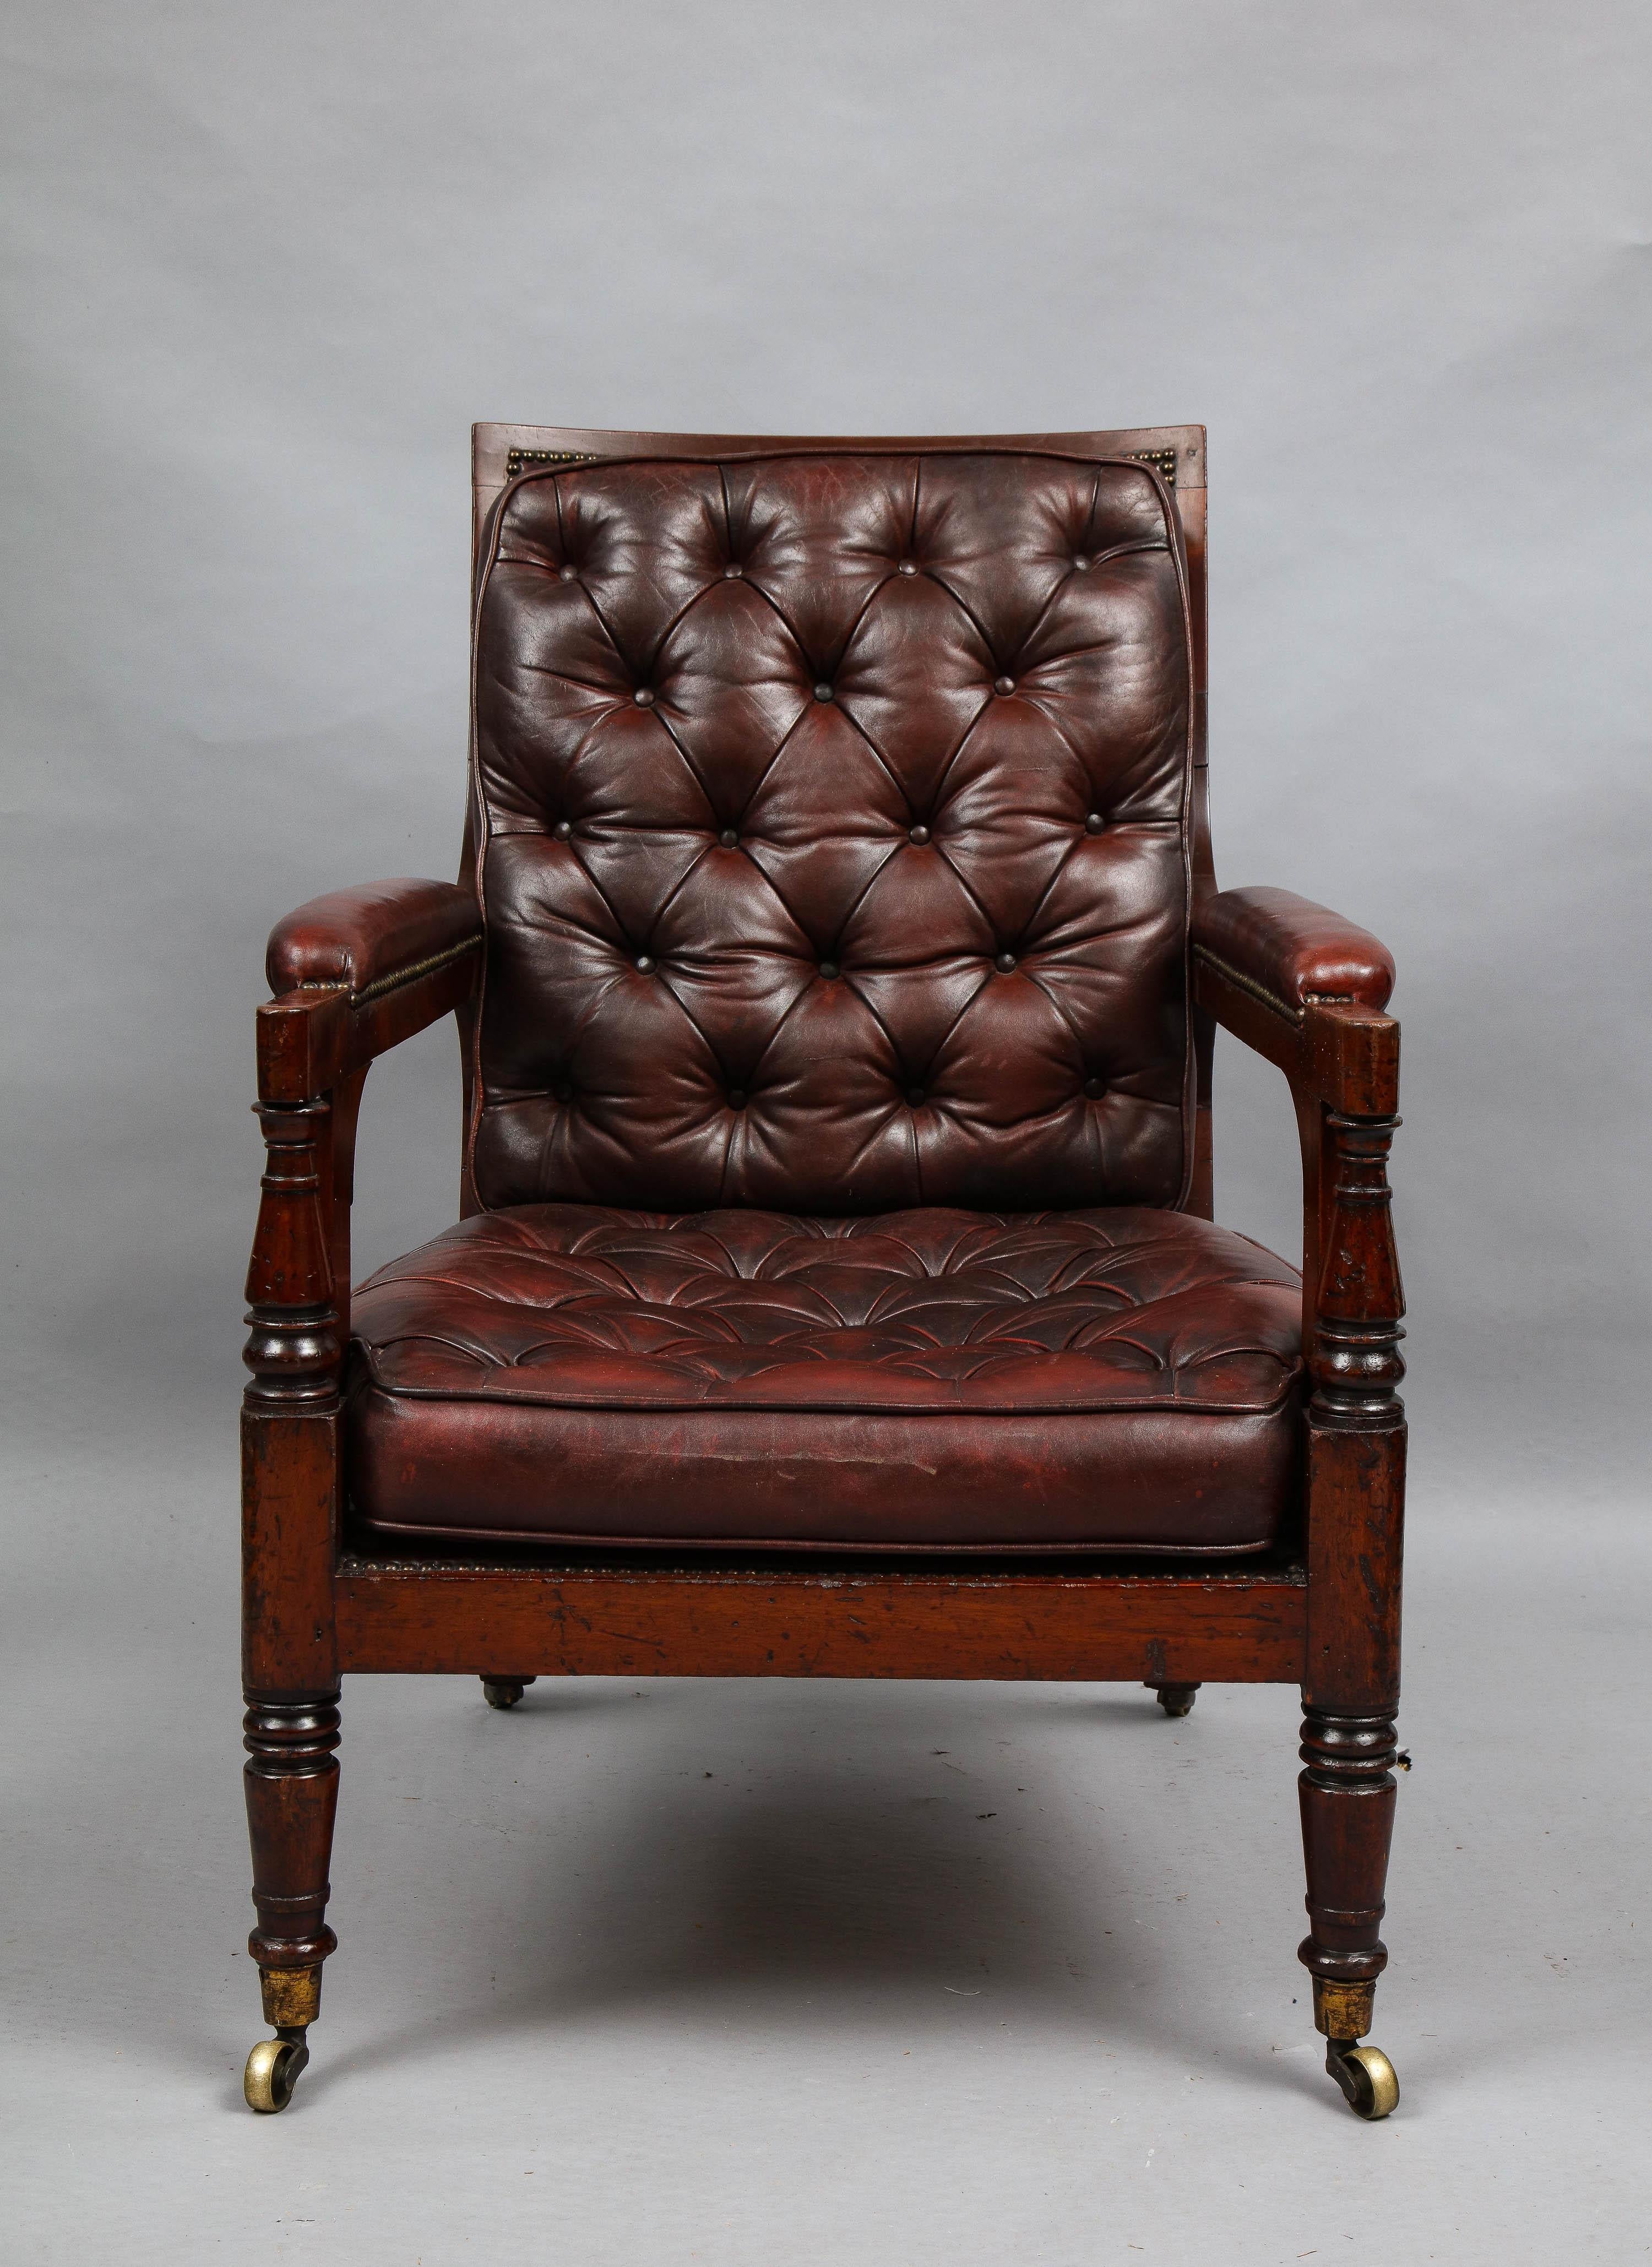 Good early 19th century mahogany library chair of good size and proportion having burgundy leather upholstery, the back with deep buttoning, while the loose cushion seat has shallow tufts over caned support, the whole with good rich color, the arm